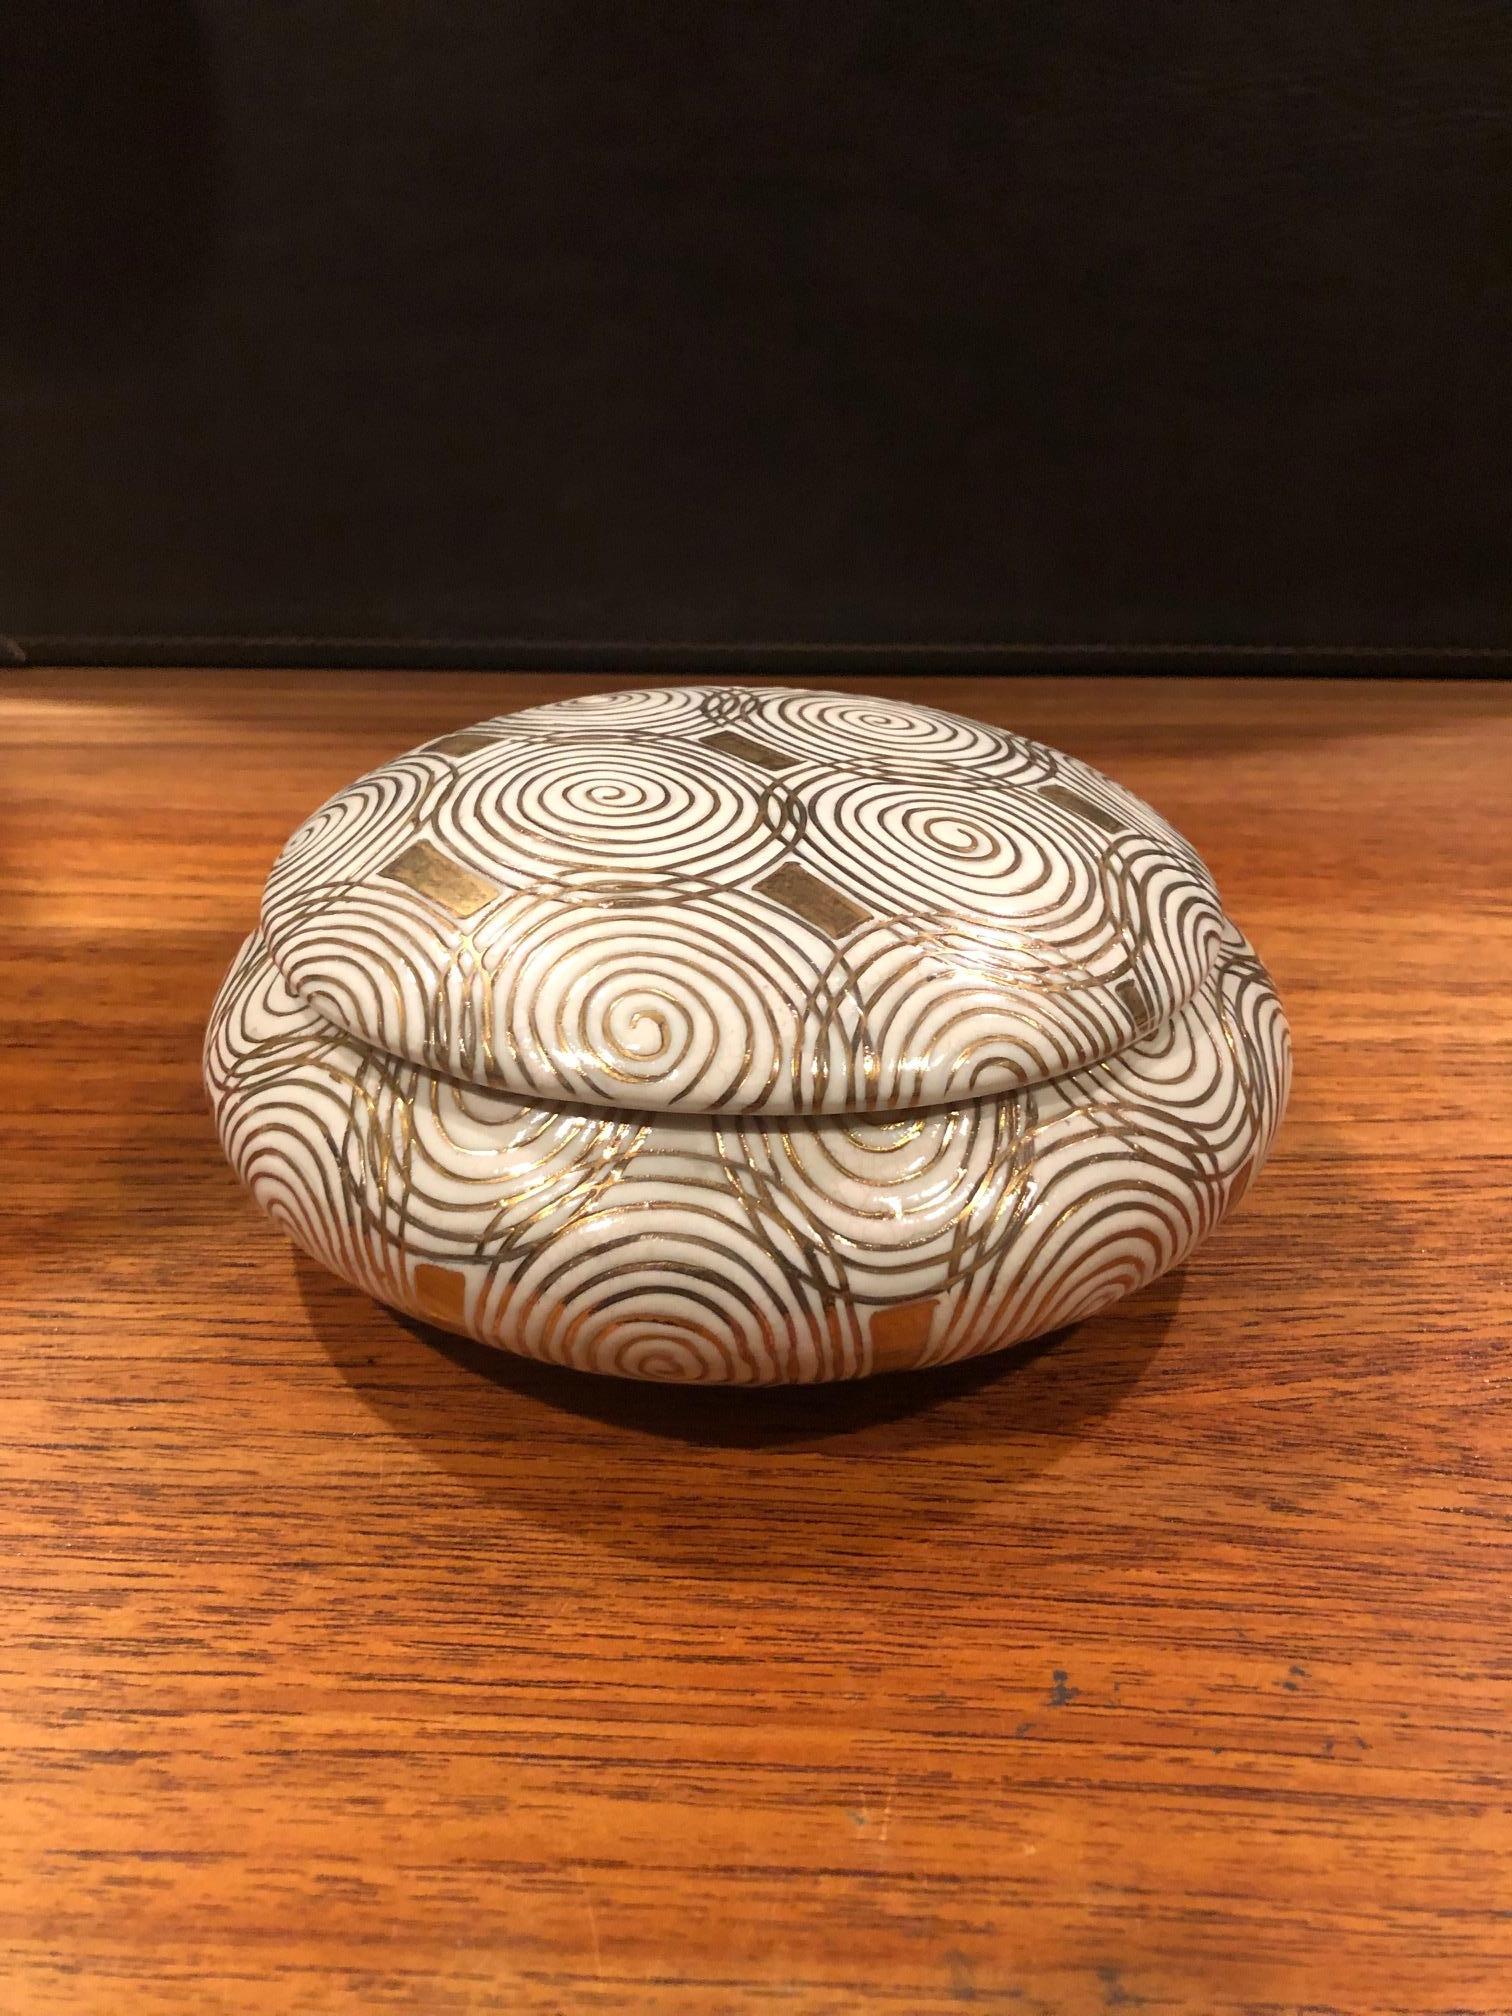 Gorgeous and rare gold and white Art Deco inspired porcelain lidded box by Jay Spectre for Silvestri, circa 1991. The piece is signed and dated 1991 on underside. The Smithsonian Institute named Jay Spectre one of its top ten designers of the 20th